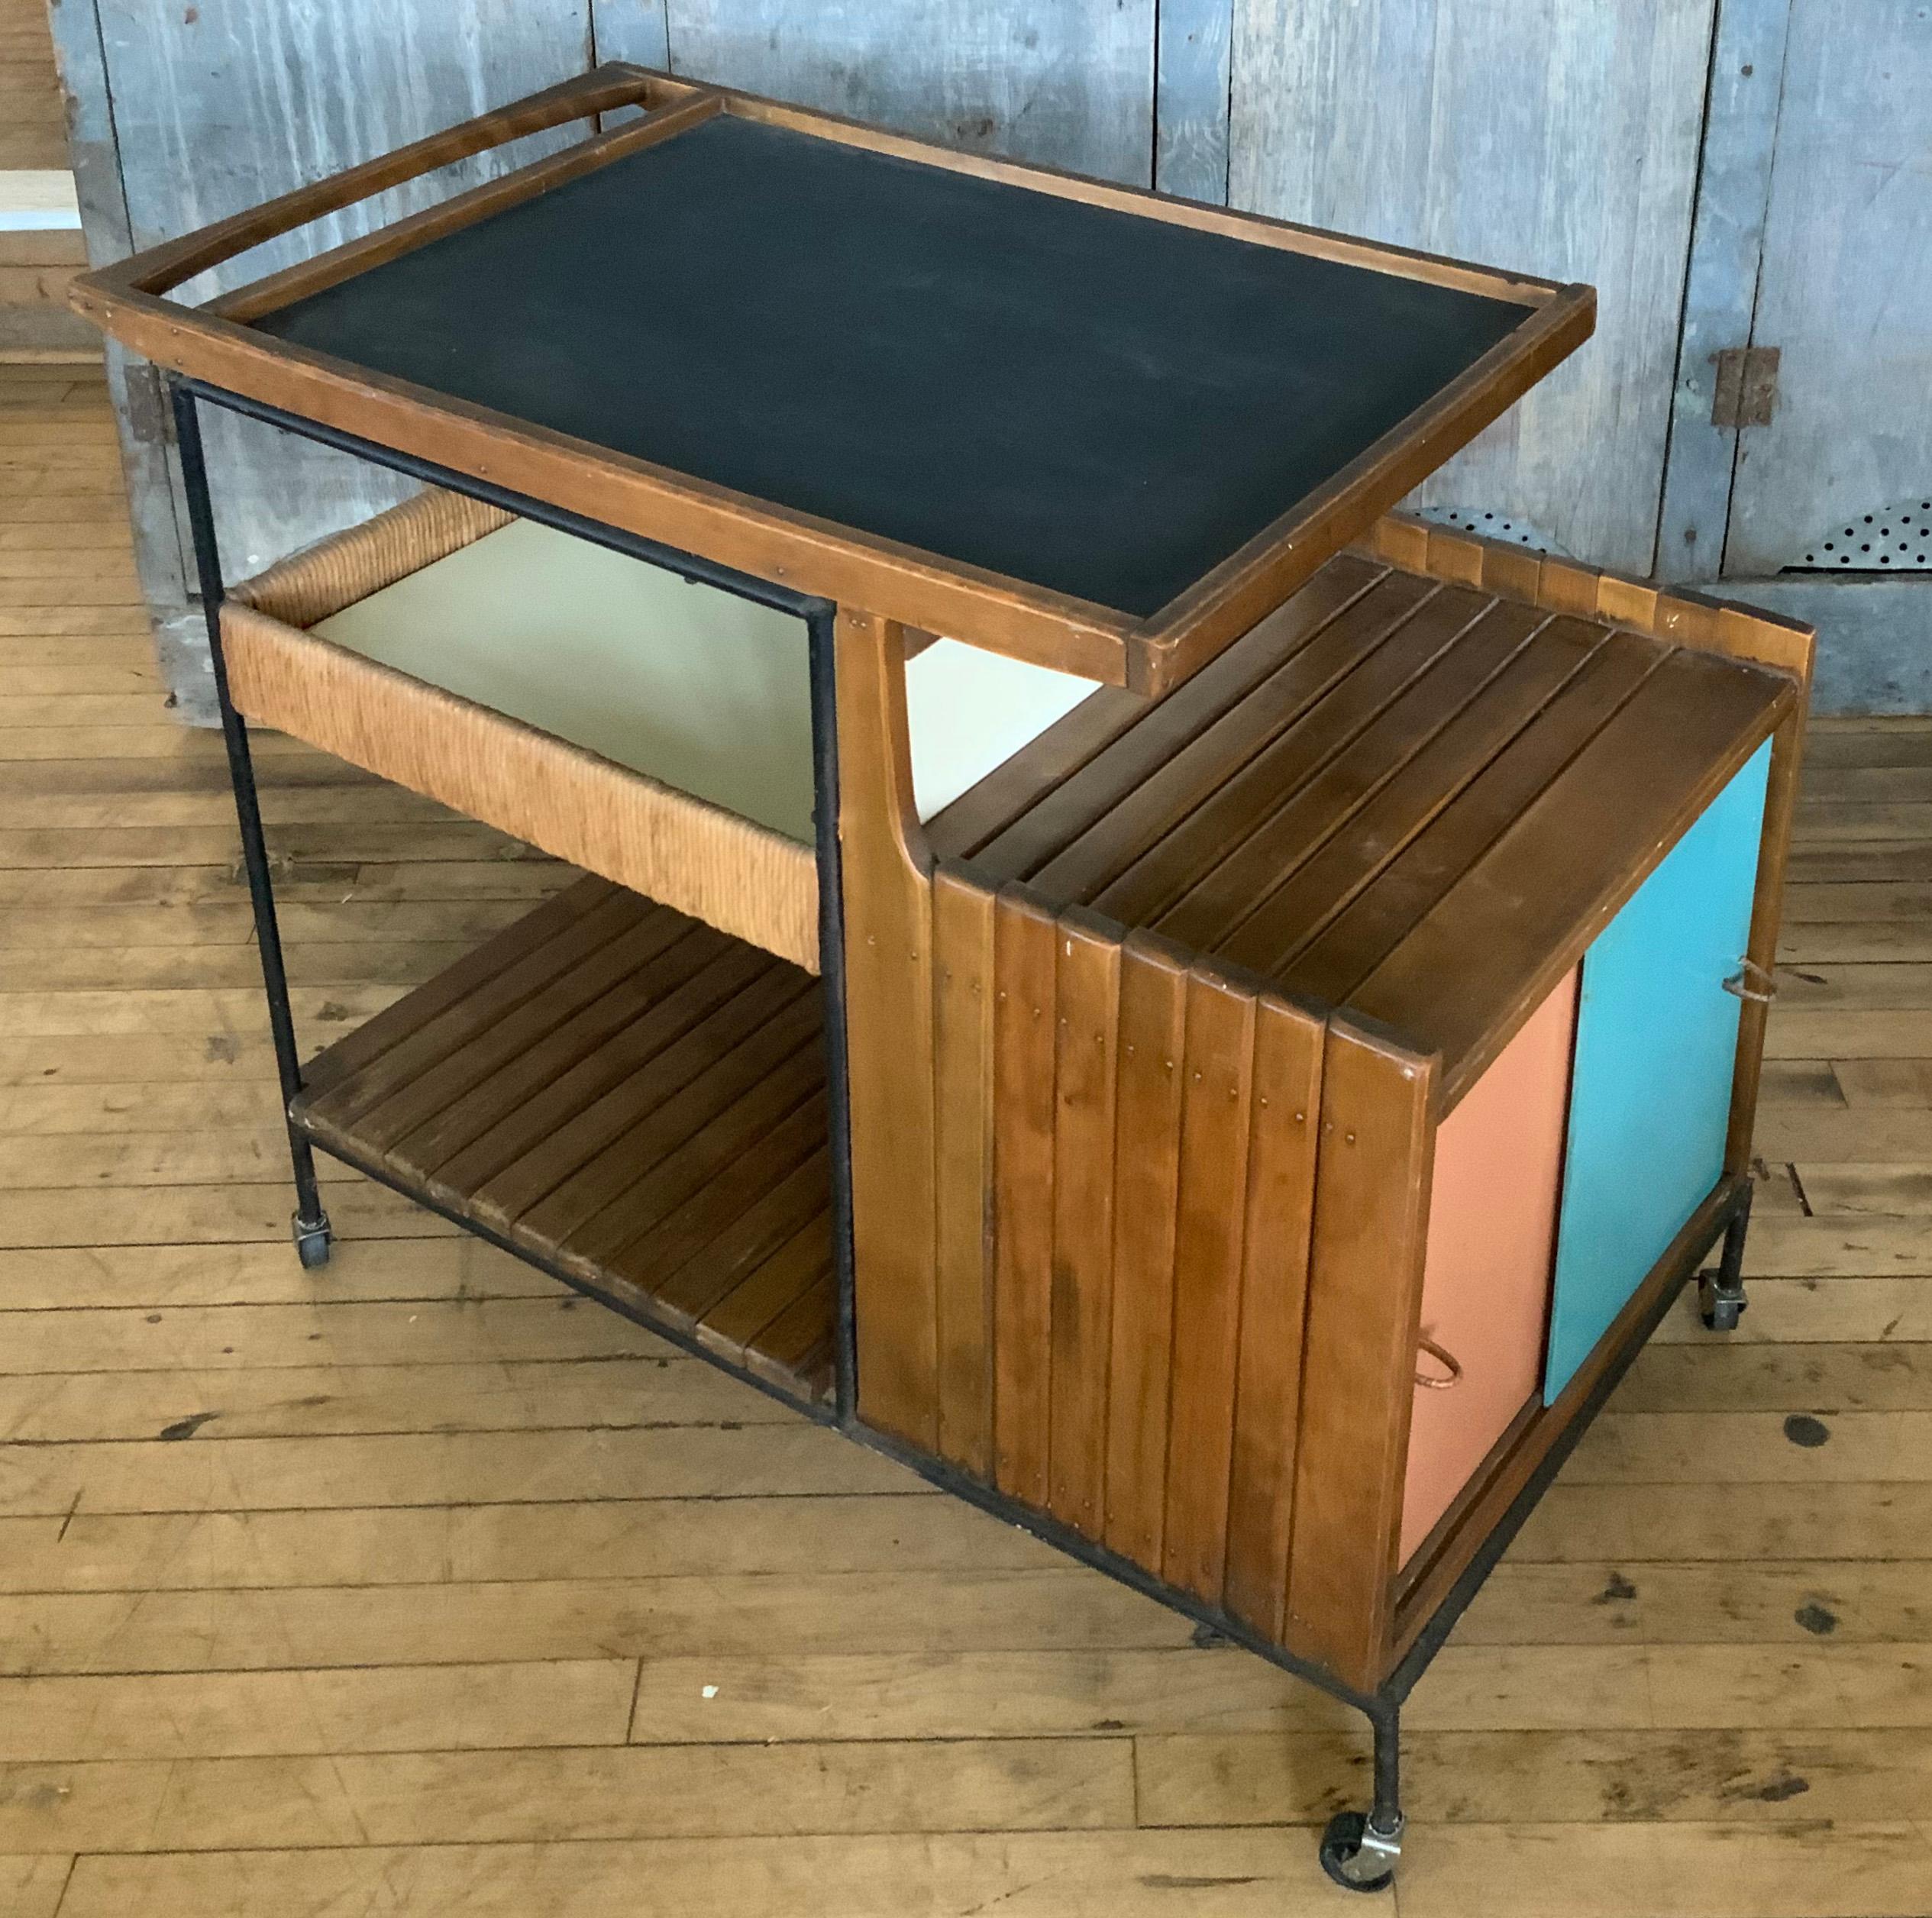 a very handsome and classic mid century rolling bar cart by Arthur Umanoff. the cart has a wrought iron frame, with maple case and one section wrapped in rope. the lower cabinet has sliding doors in their original colored panels. beautiful